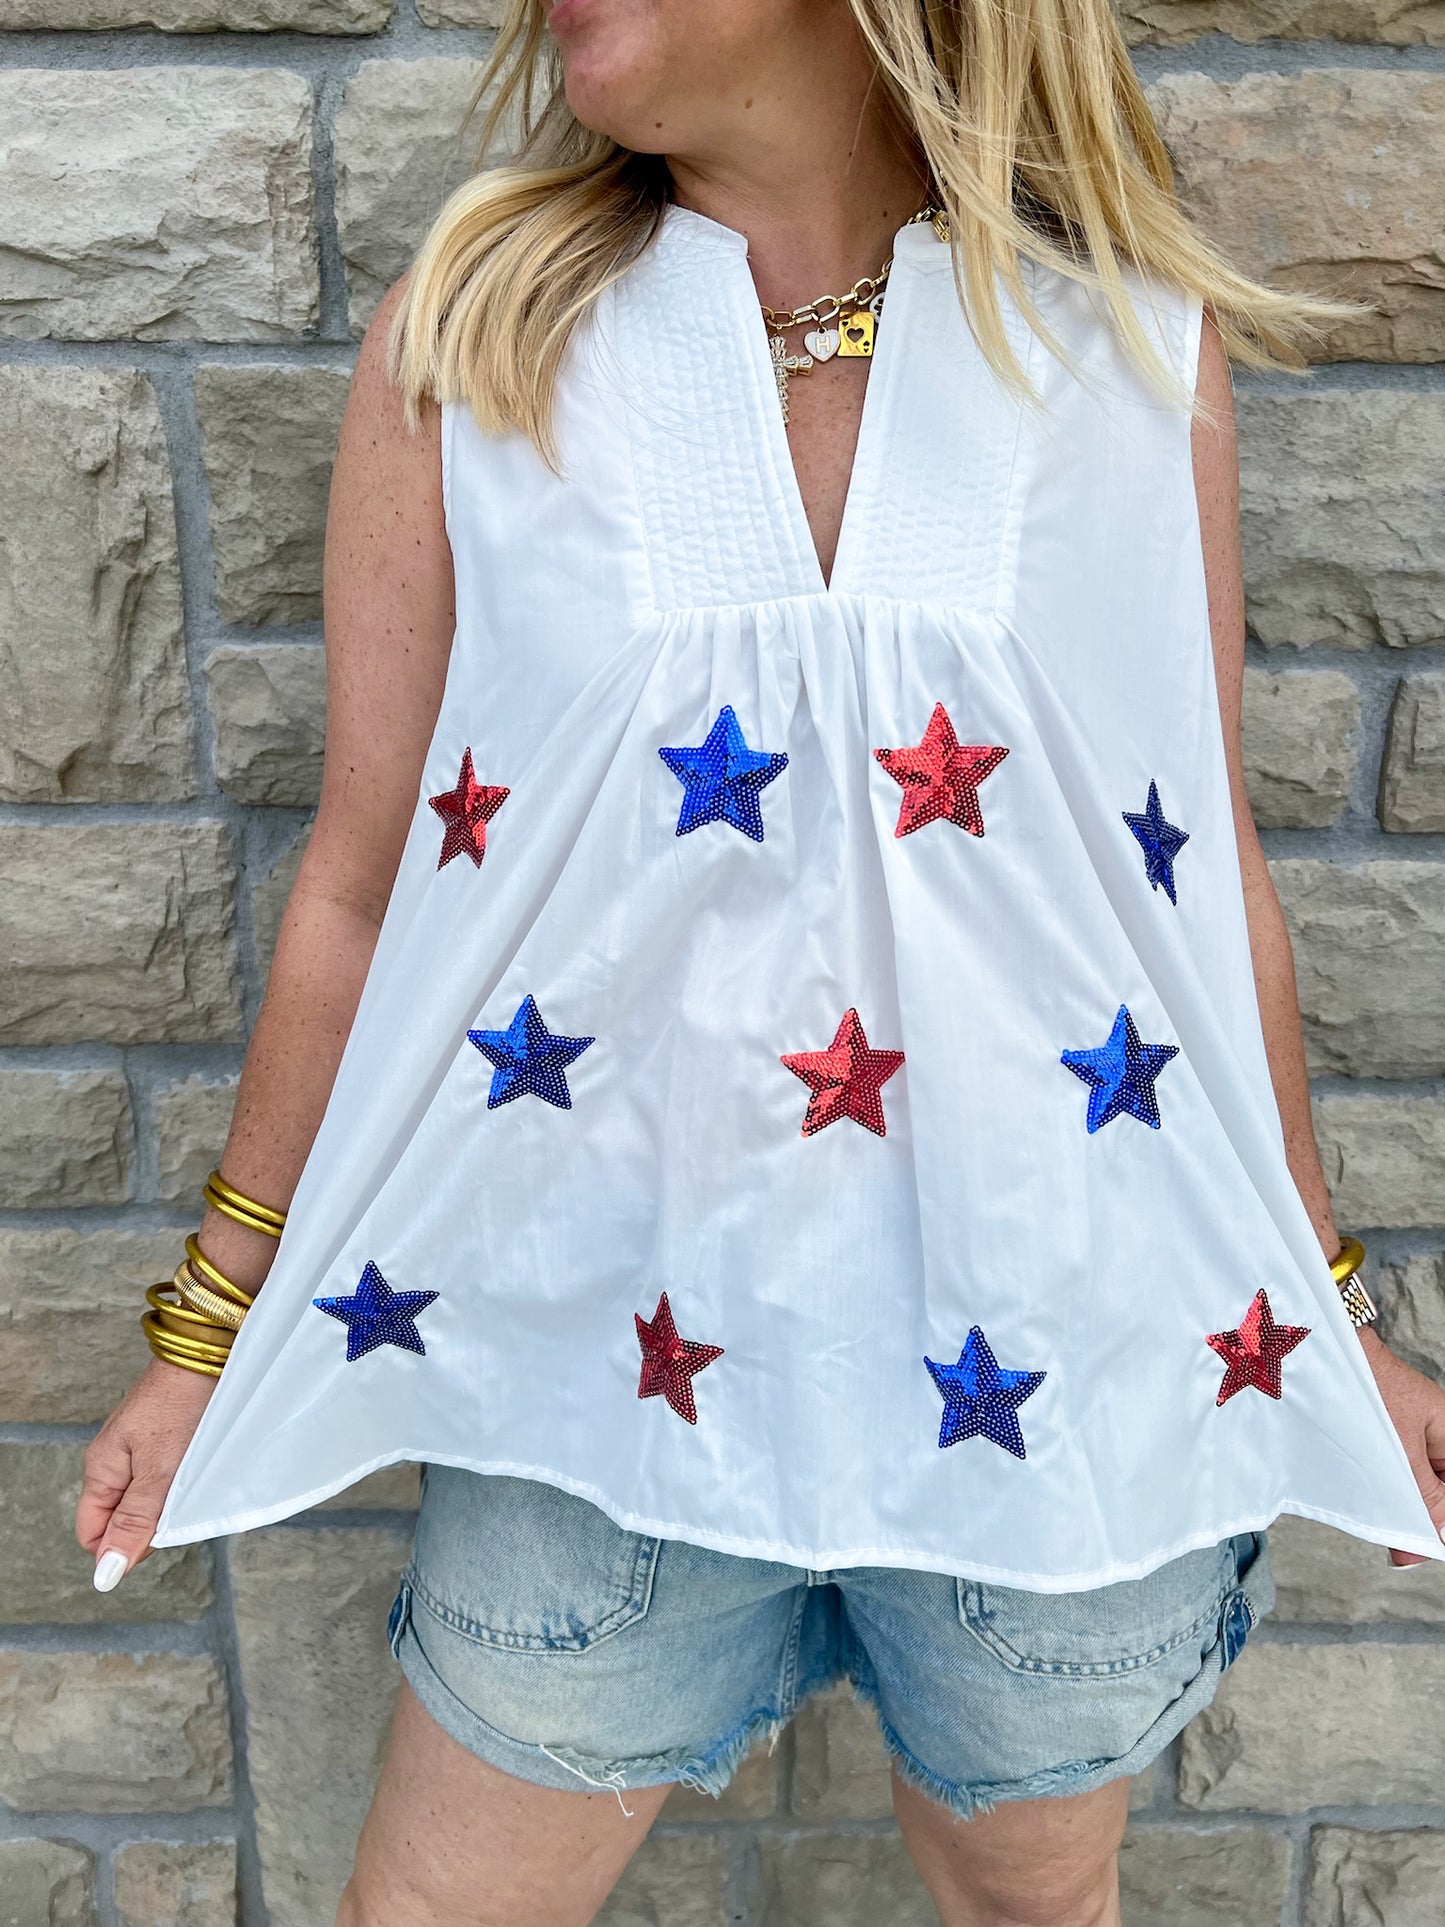 You're A Star Sequin Top